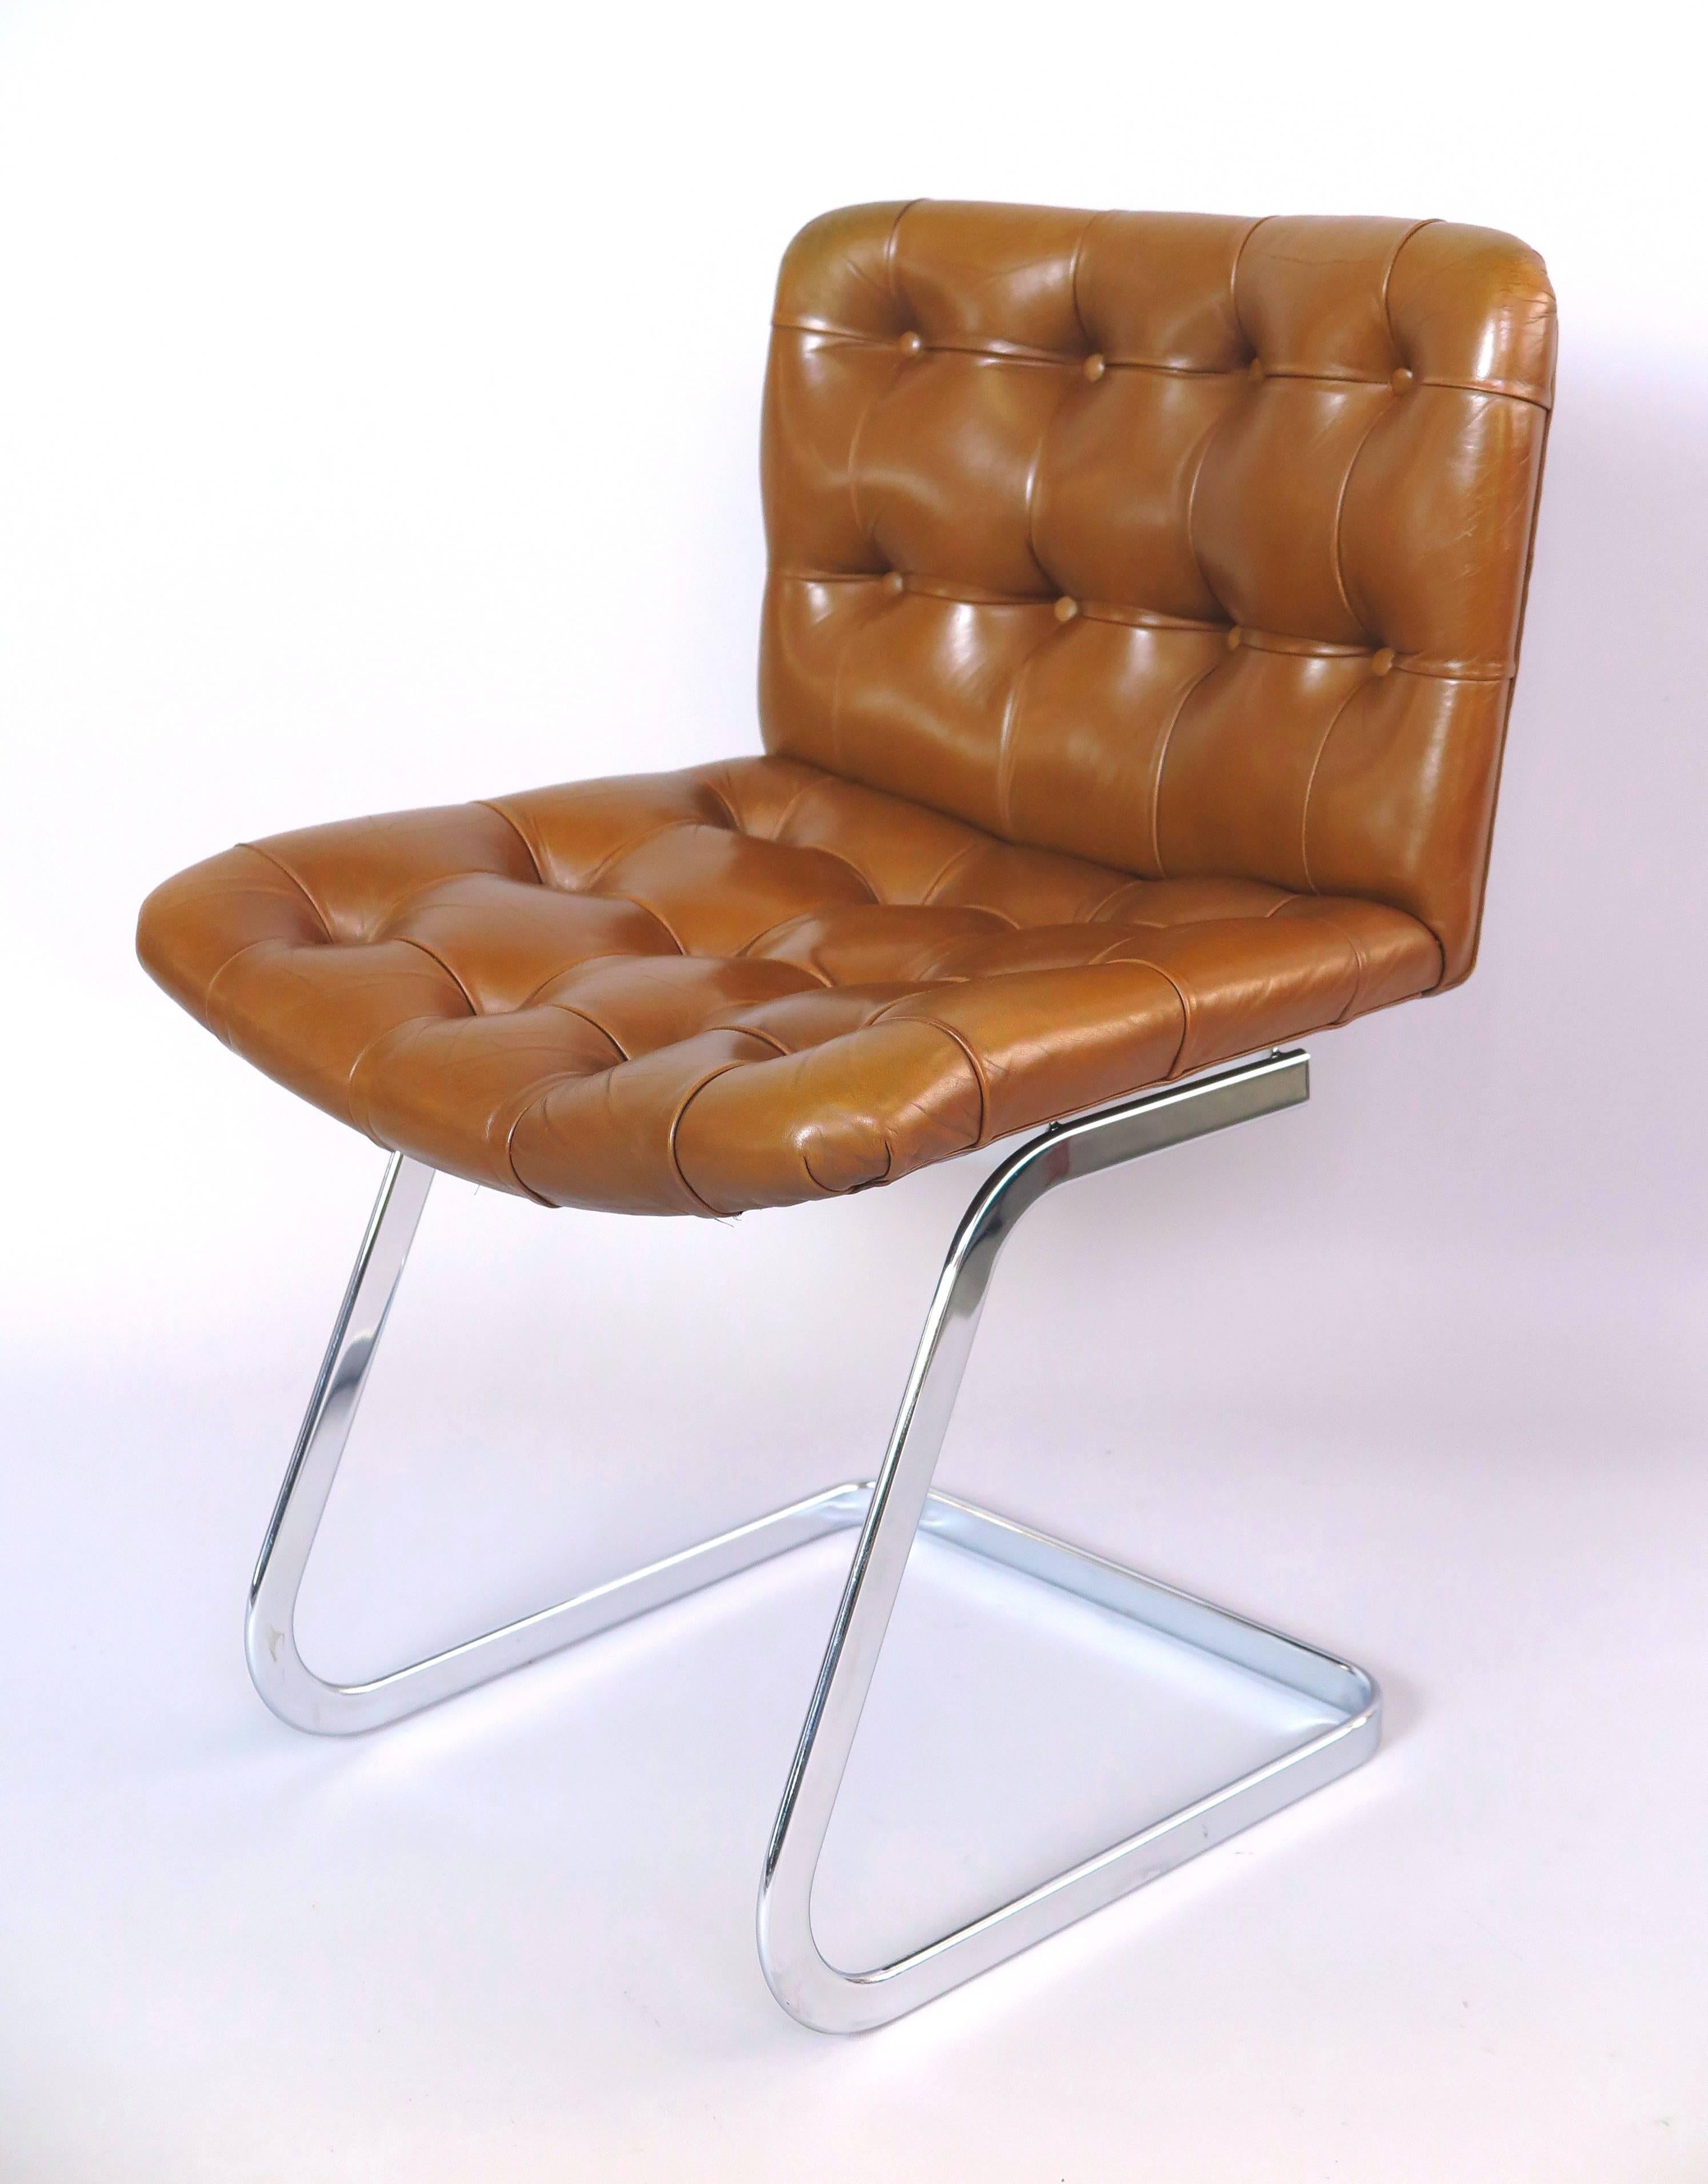 Early edition of the high quality and very comfortable Cantilever chair, designed in 1958 by Robert Haussmann for the UNESCO building in Paris, Button-tufted leather, chrome.
 